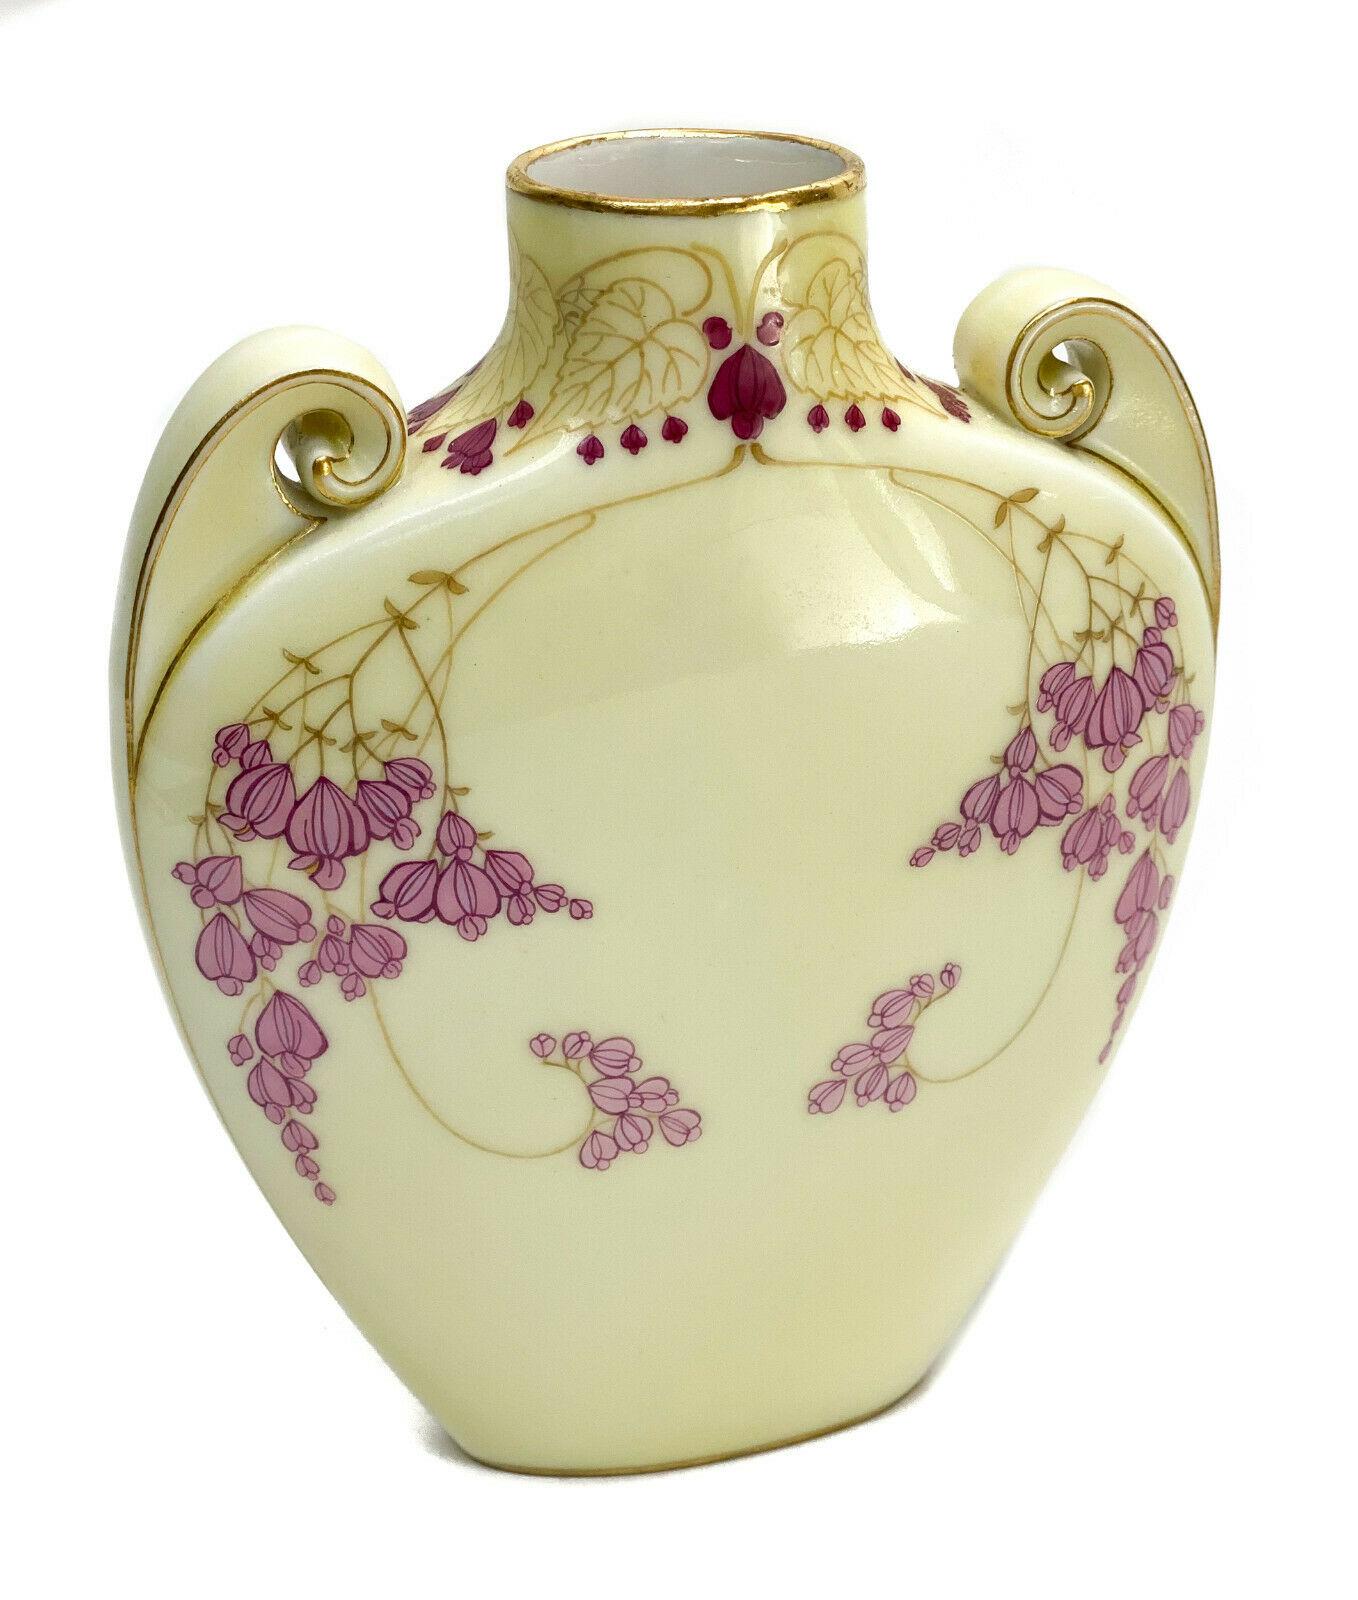 Manufacture de Sevres Porcelain Twin Handled Vase Pink Flowers, 1911

A pale yellow ground with hand painted pink decorations around the center. Manufacture de Sevres mark to the underside with date marks of 1911.

Additional